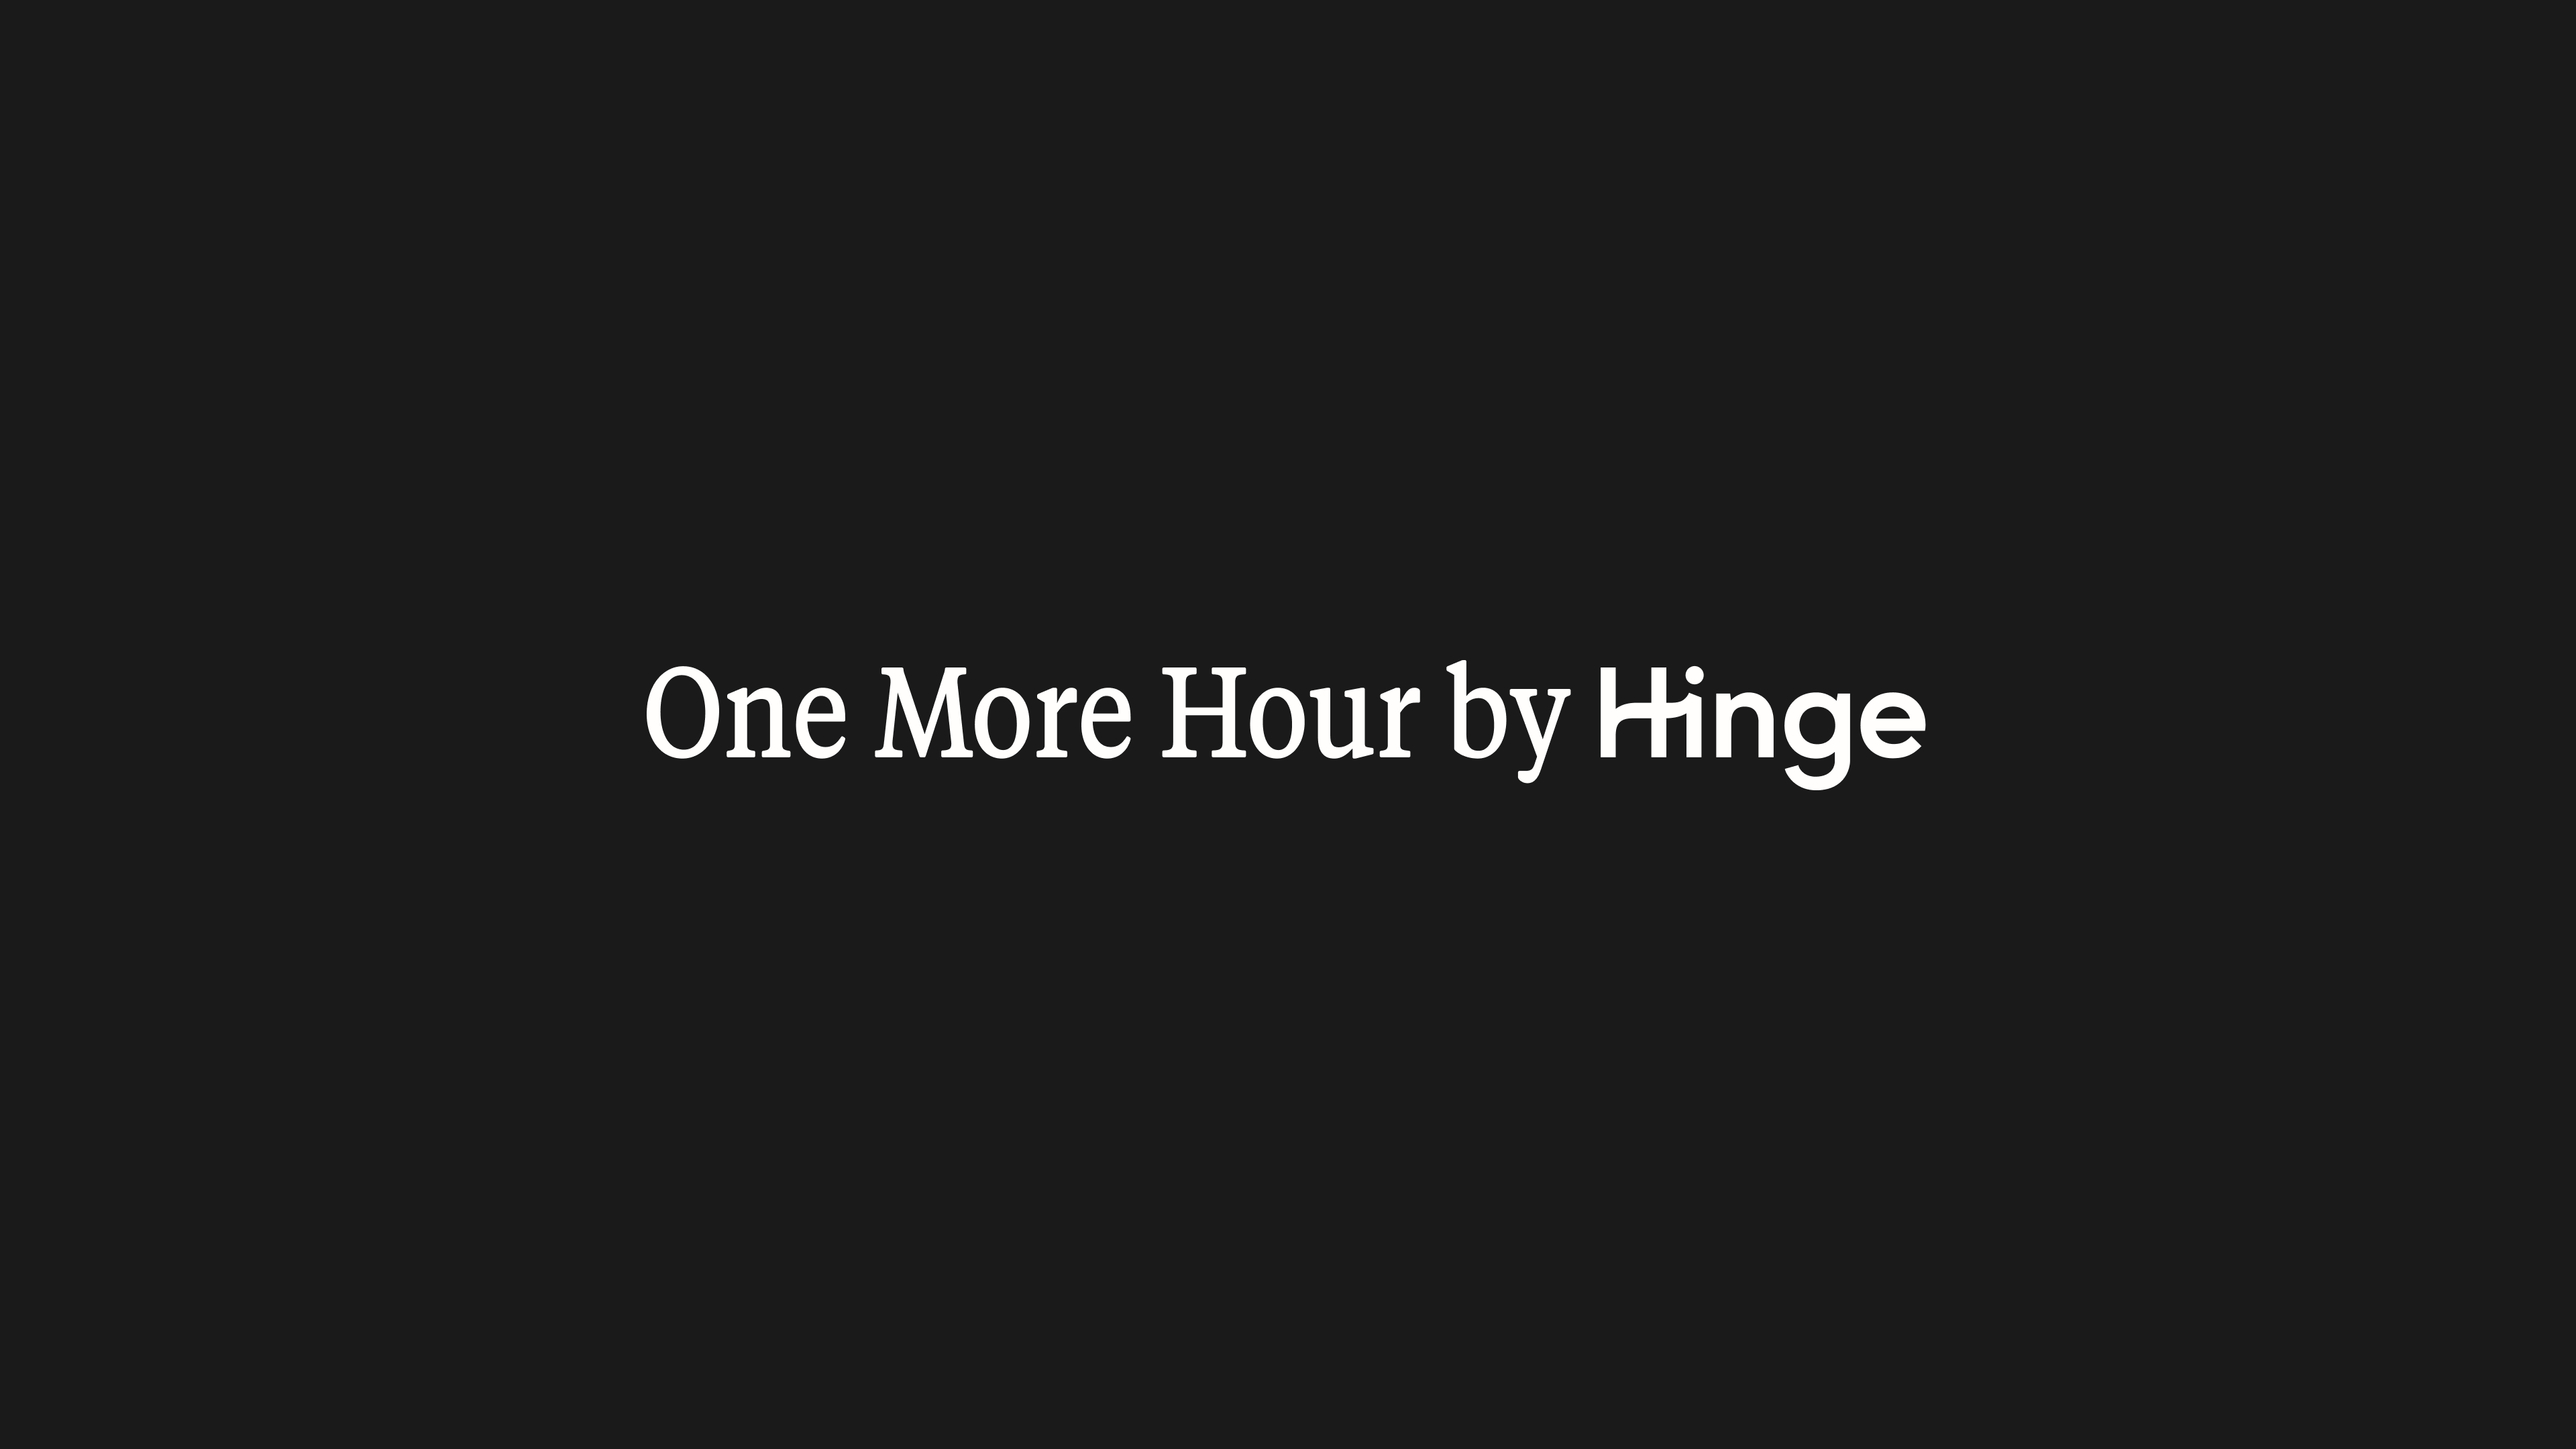 One More Hour by Hinge